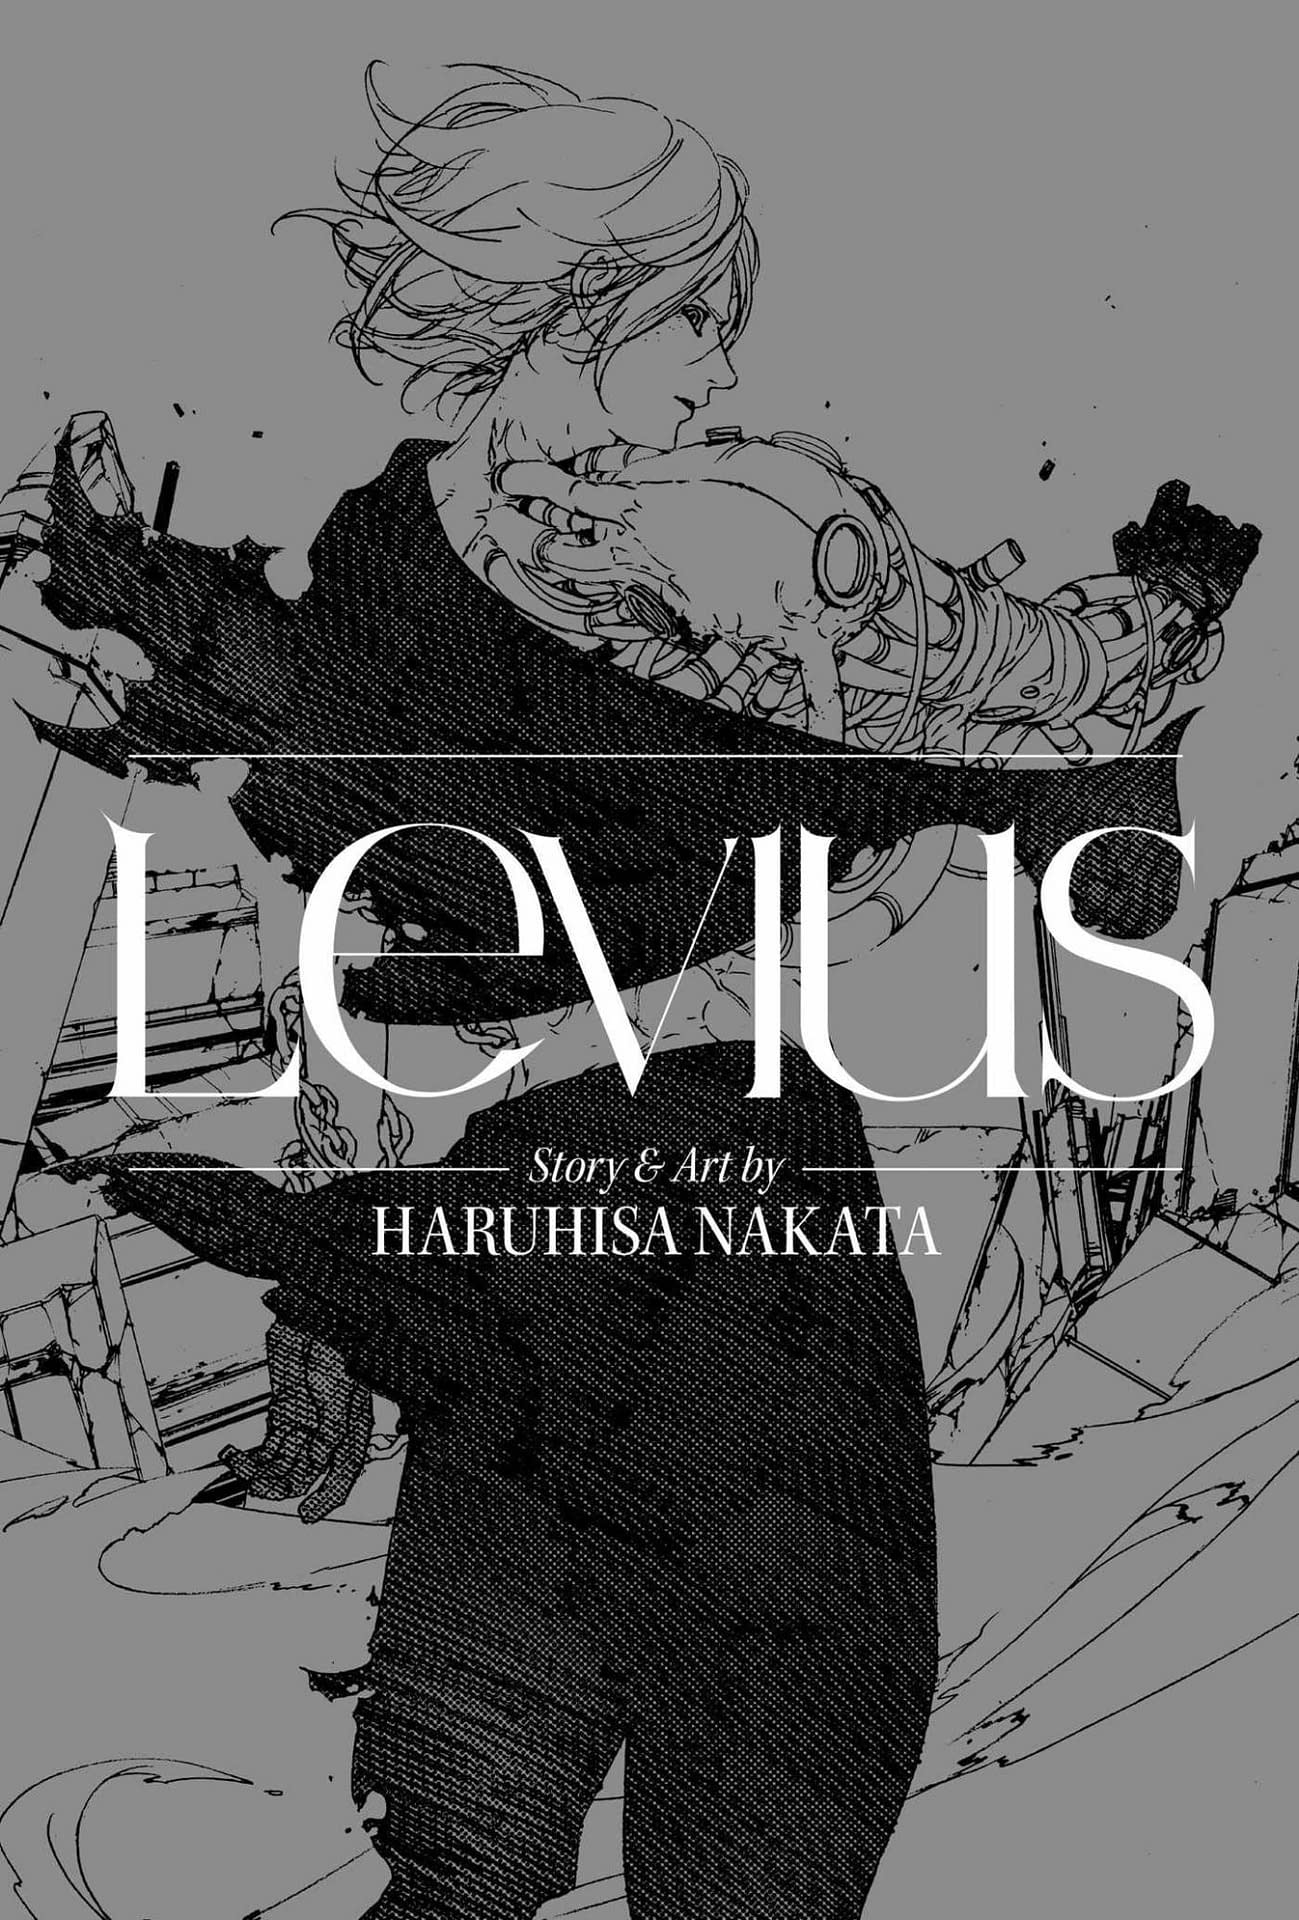 "Levius" is a Lavish, Gorgeous and Violent Steampunk MMA Manga [Review]